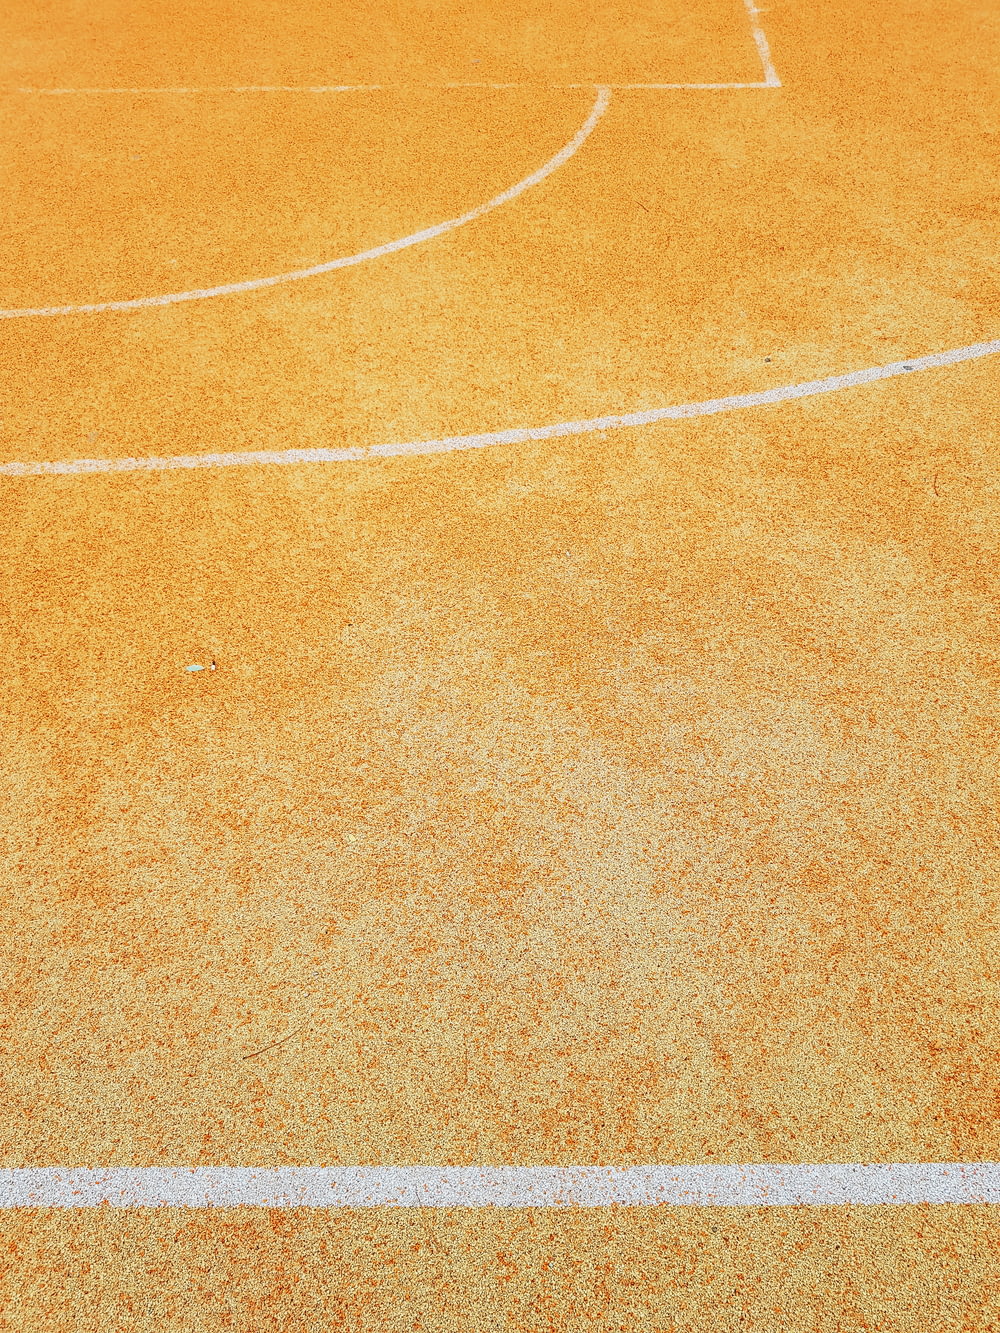 a basketball court with a white line on it